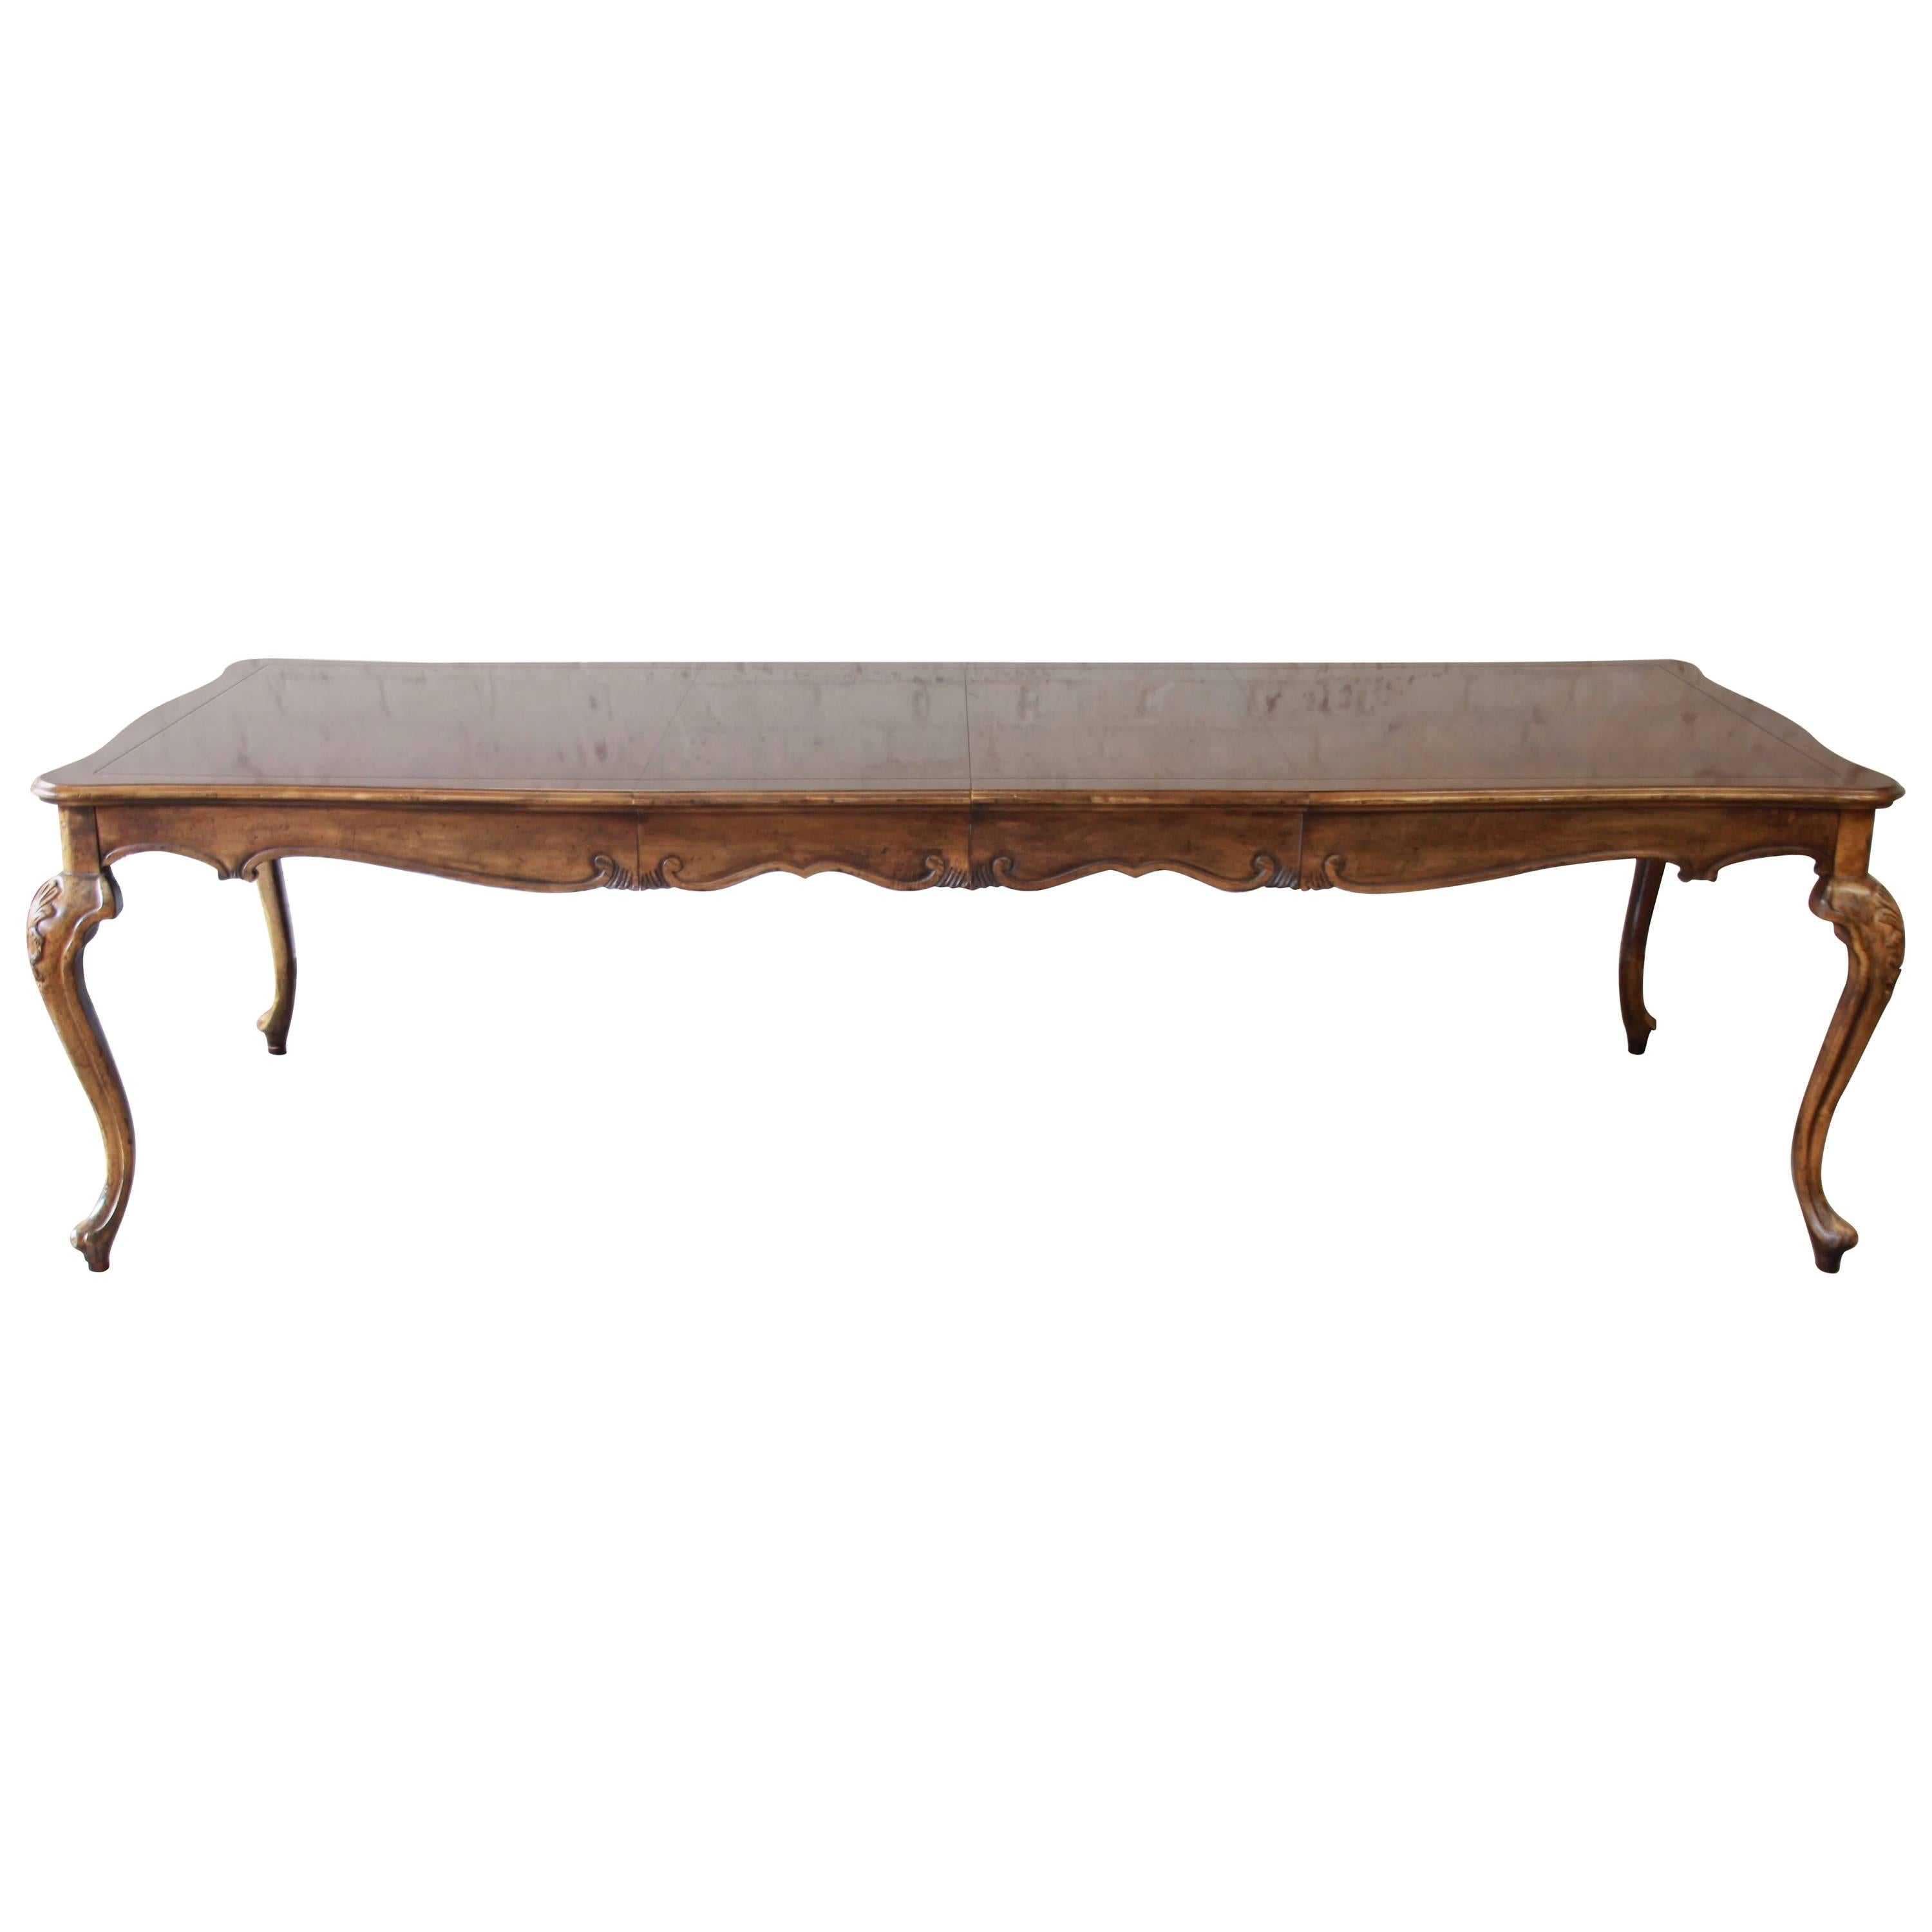 French Provincial Extension Dining Table by Baker Furniture